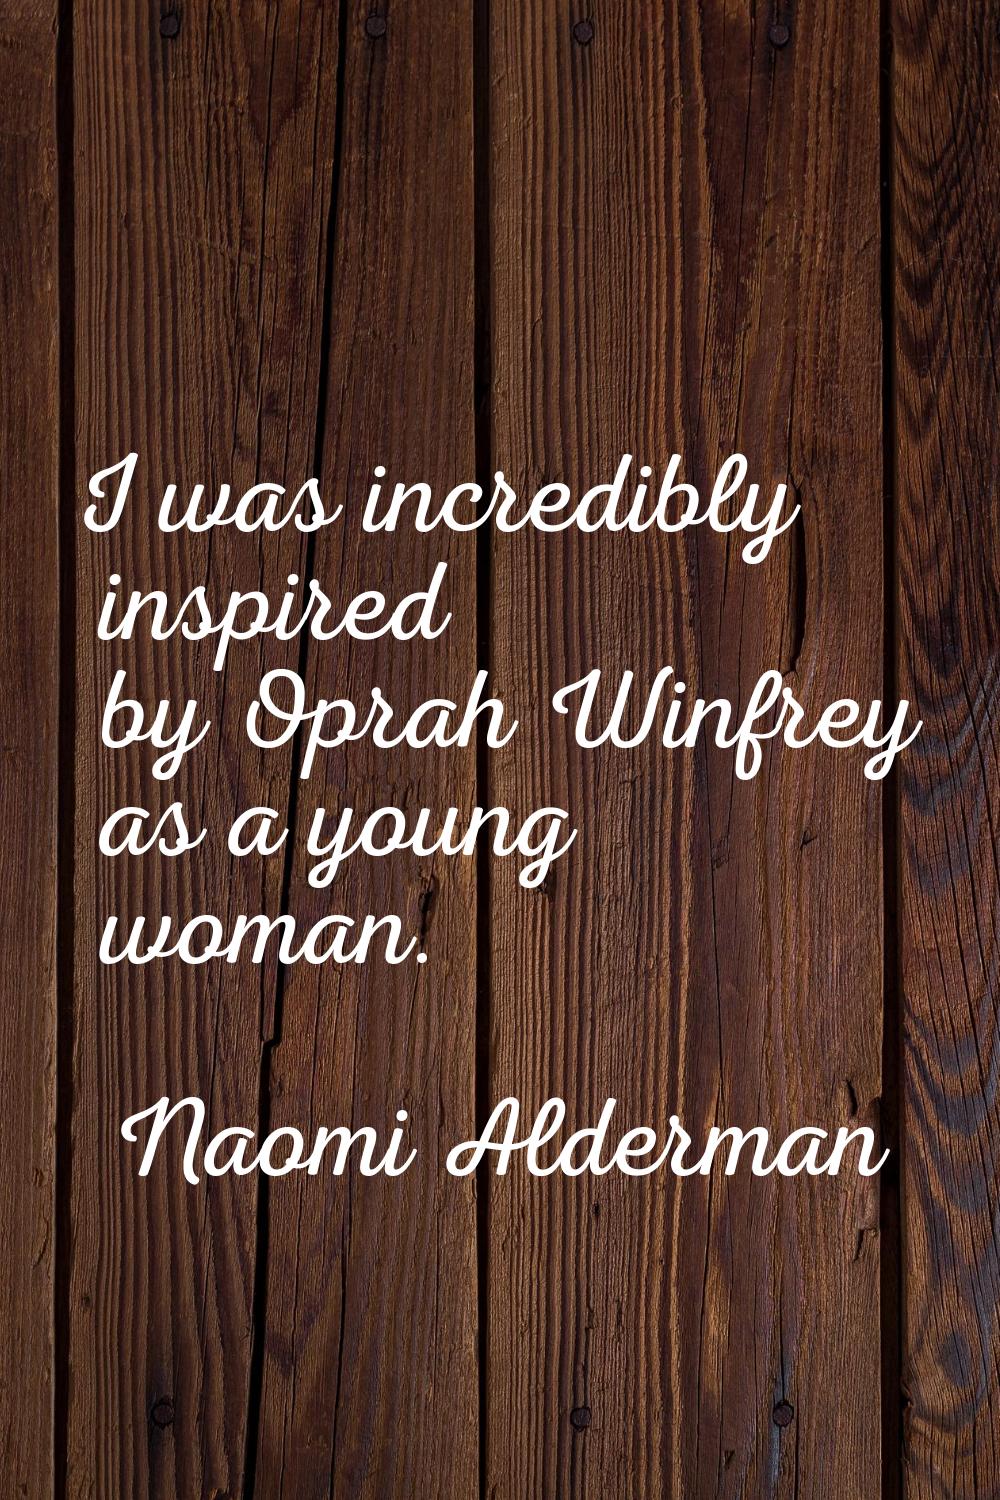 I was incredibly inspired by Oprah Winfrey as a young woman.